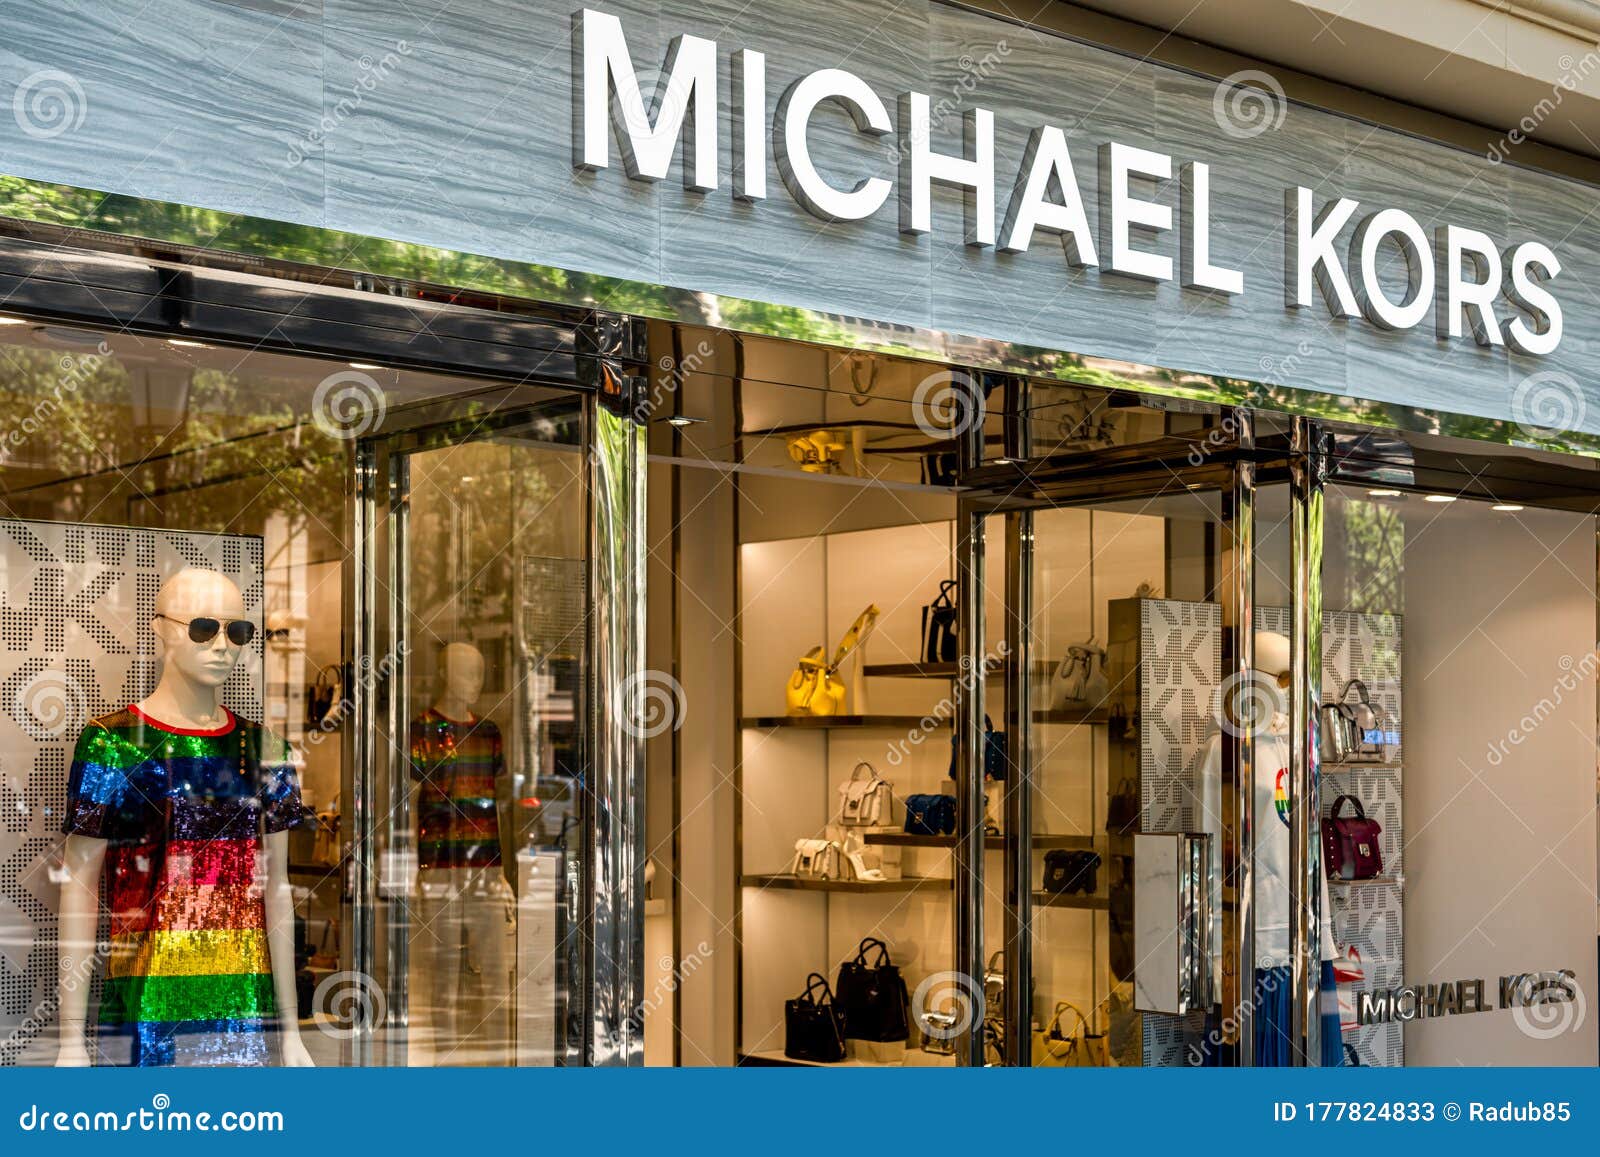 Michael Store Ready for Annual Gay Parade. Editorial Stock Photo - Image of accessories, elegance: 177824833